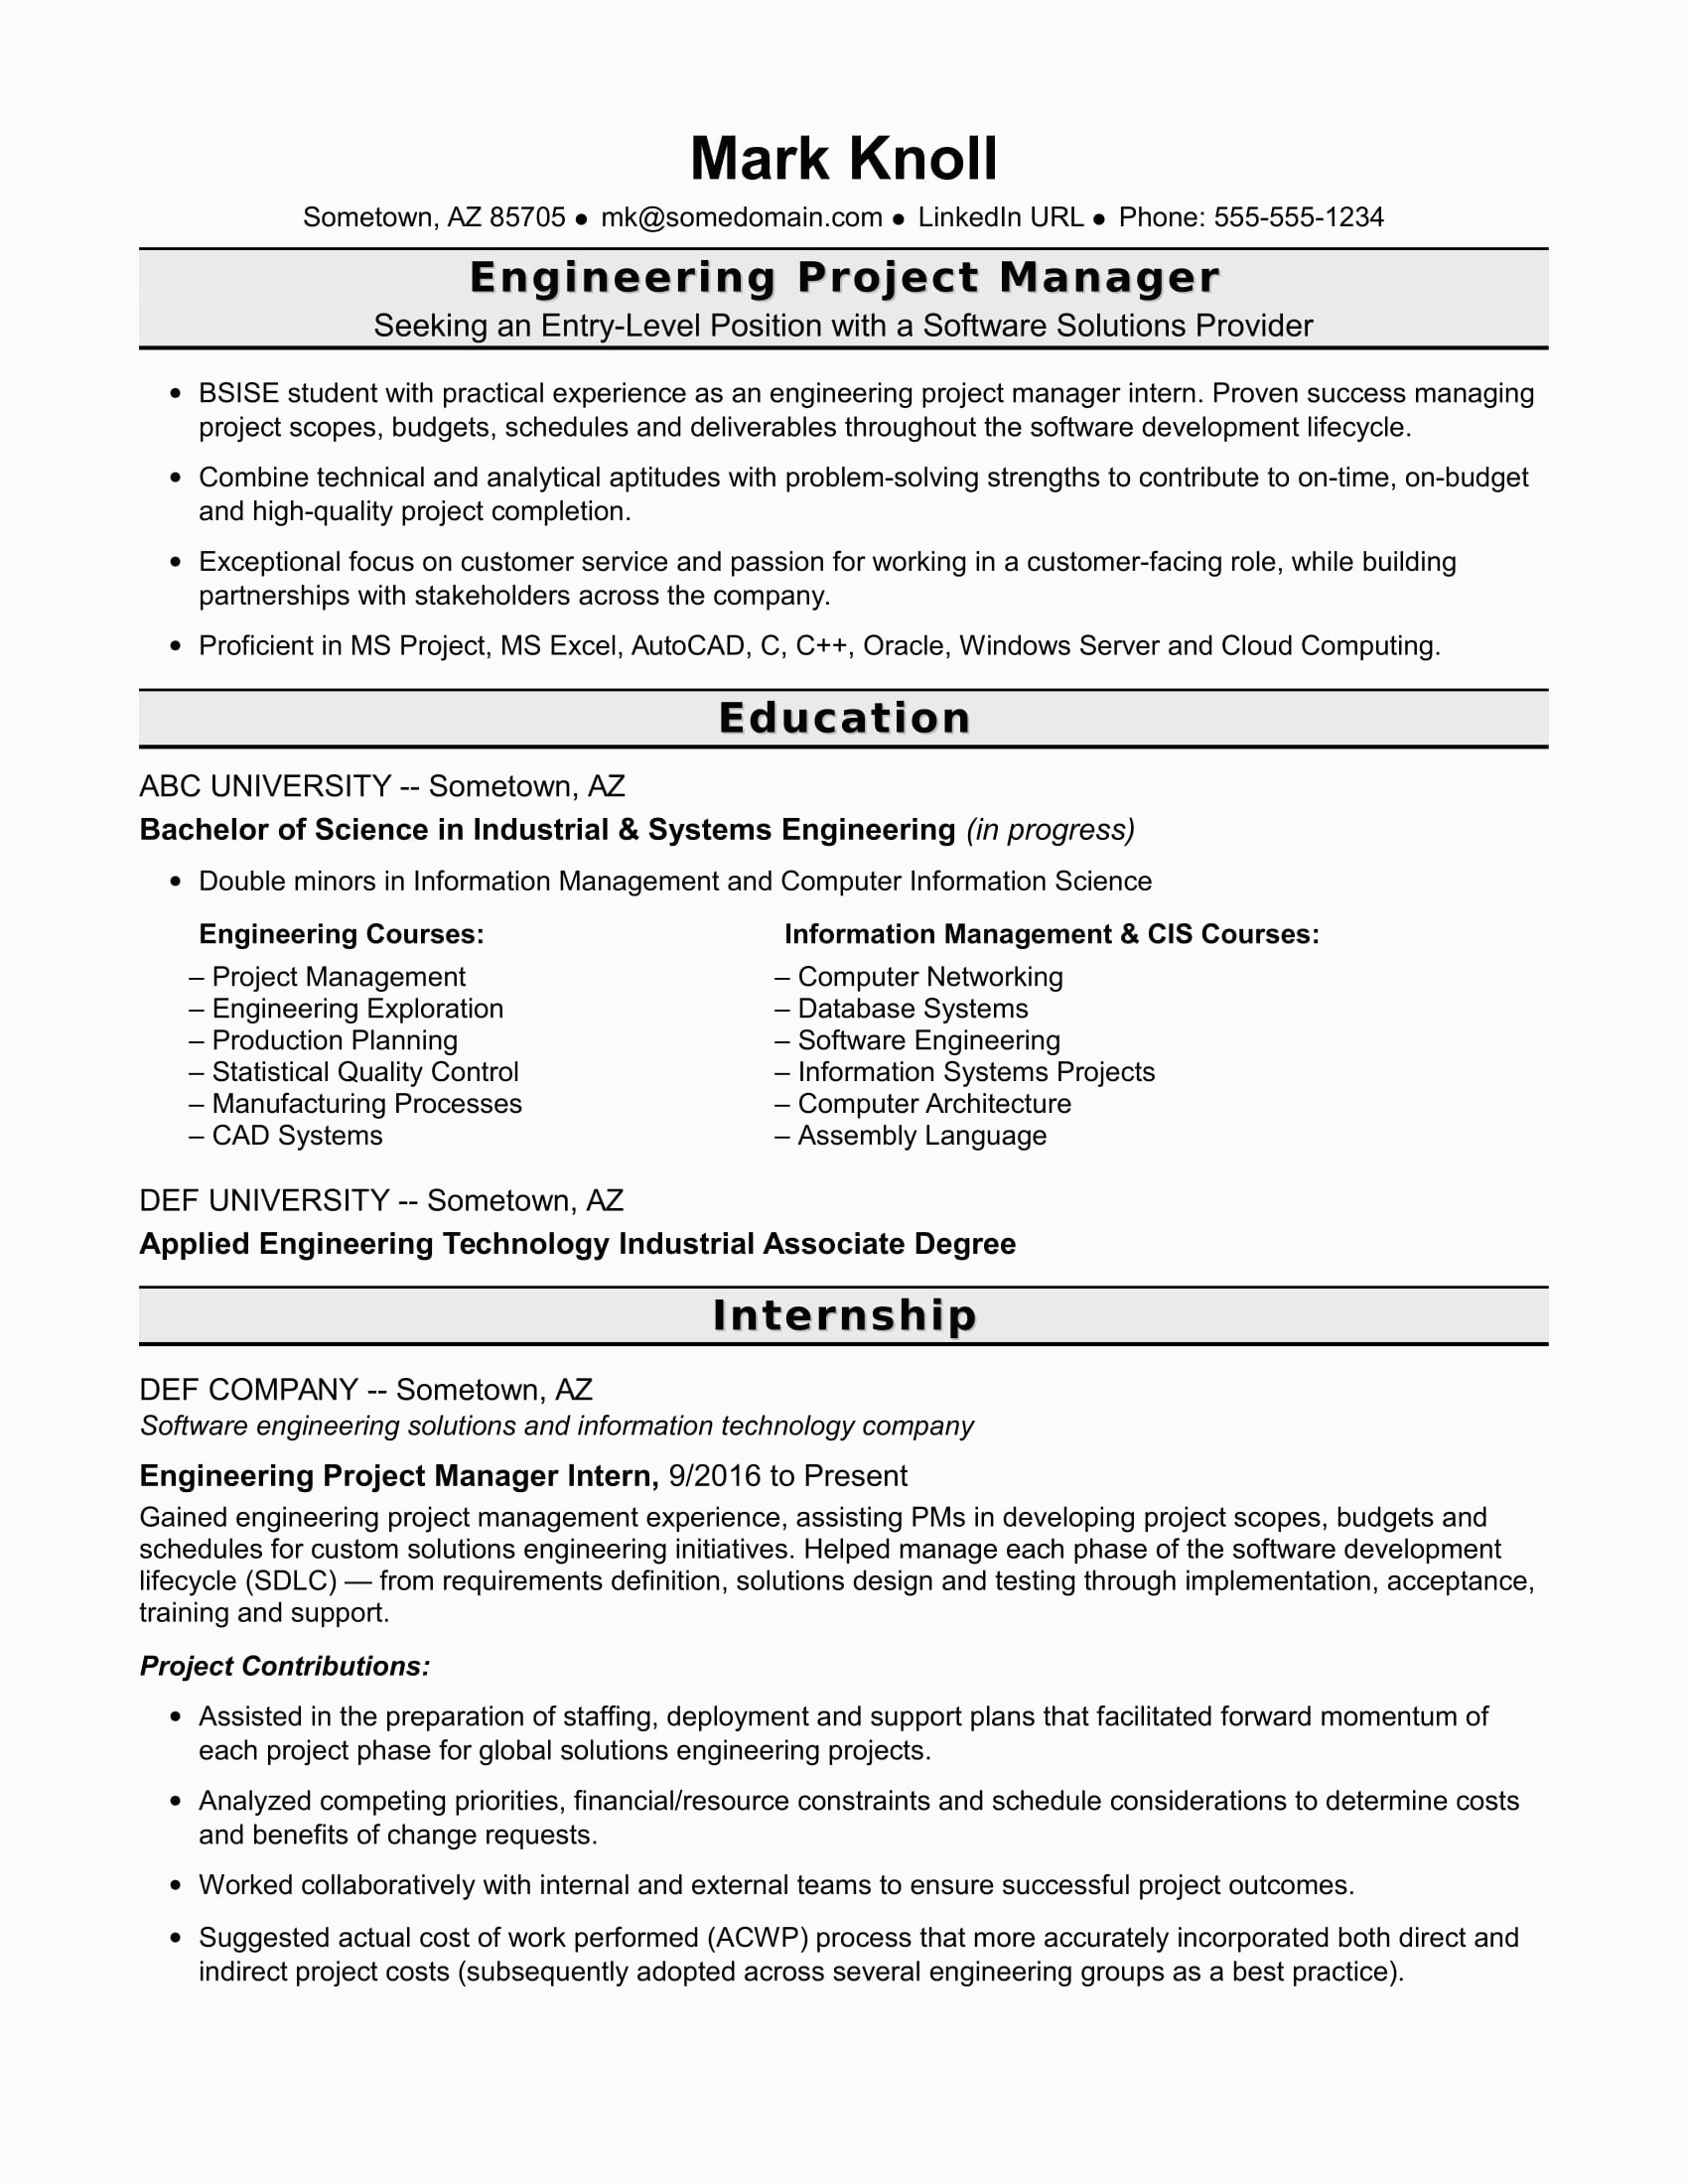 Entry Level Project Manager Resume Sample Entry Level Project Manager Resume for Engineers